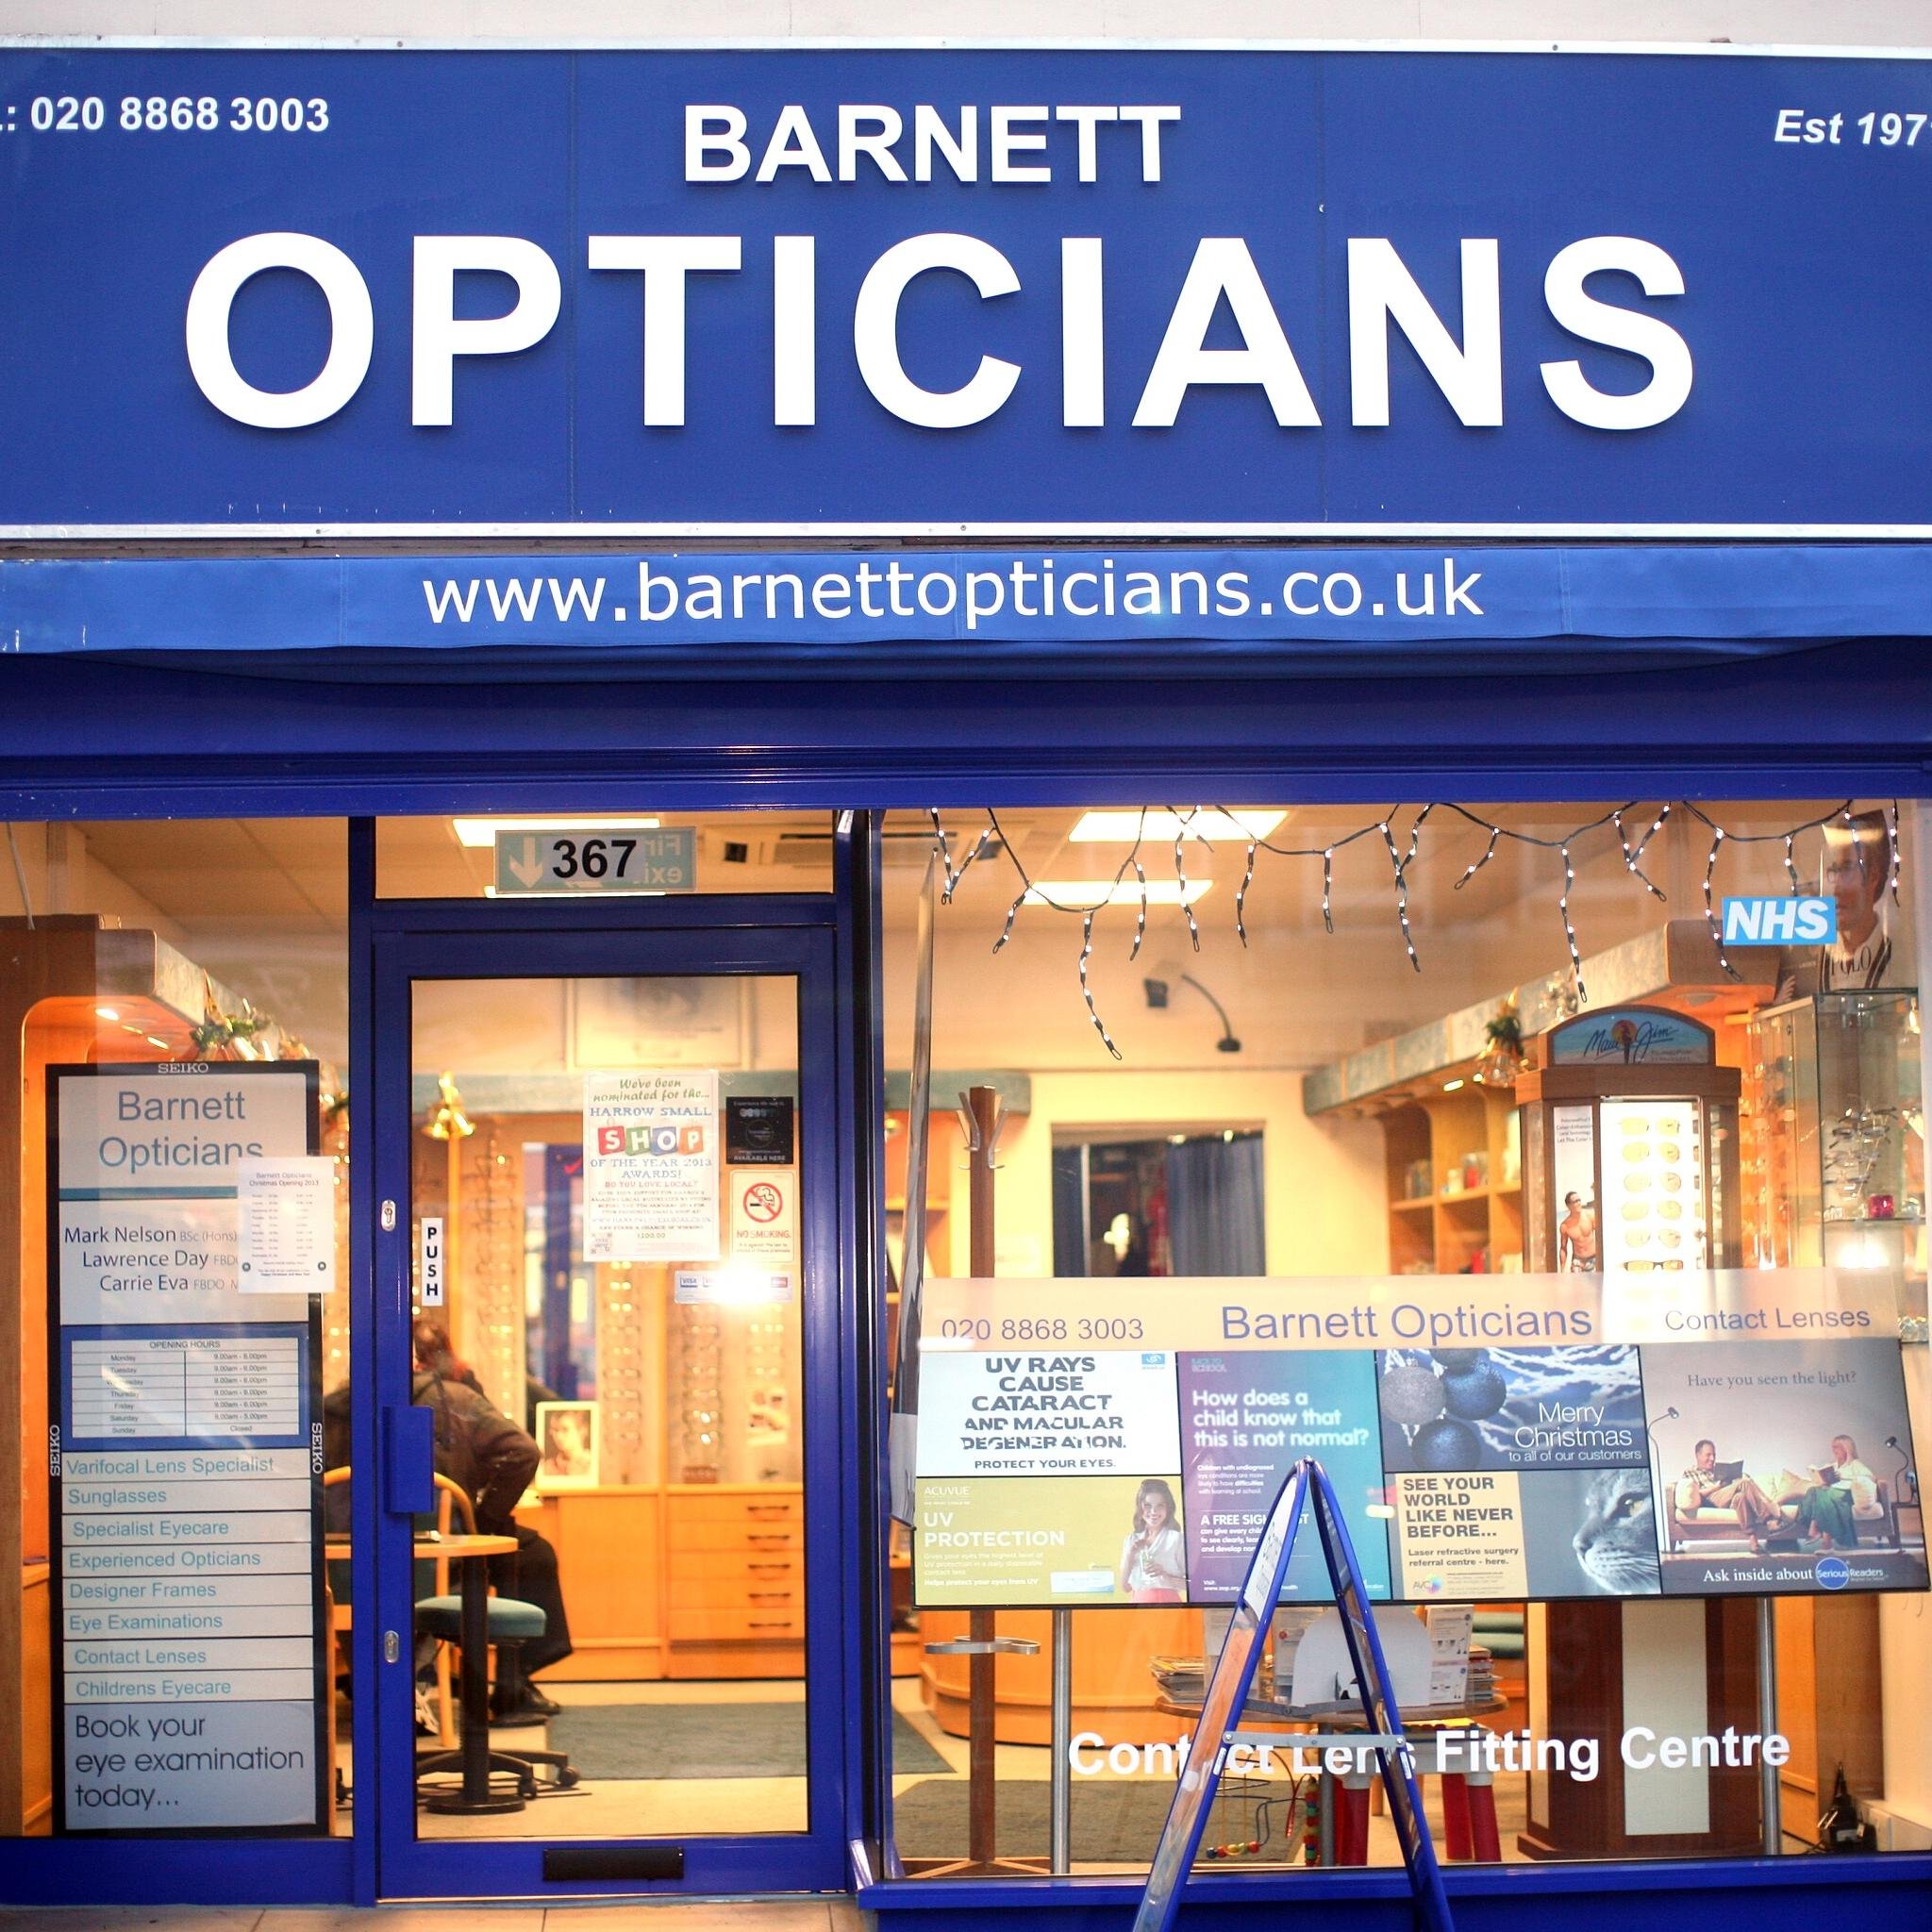 Independent opticians (est.1971), with experienced professionals serving the local community of Pinner and Harrow, NW London.